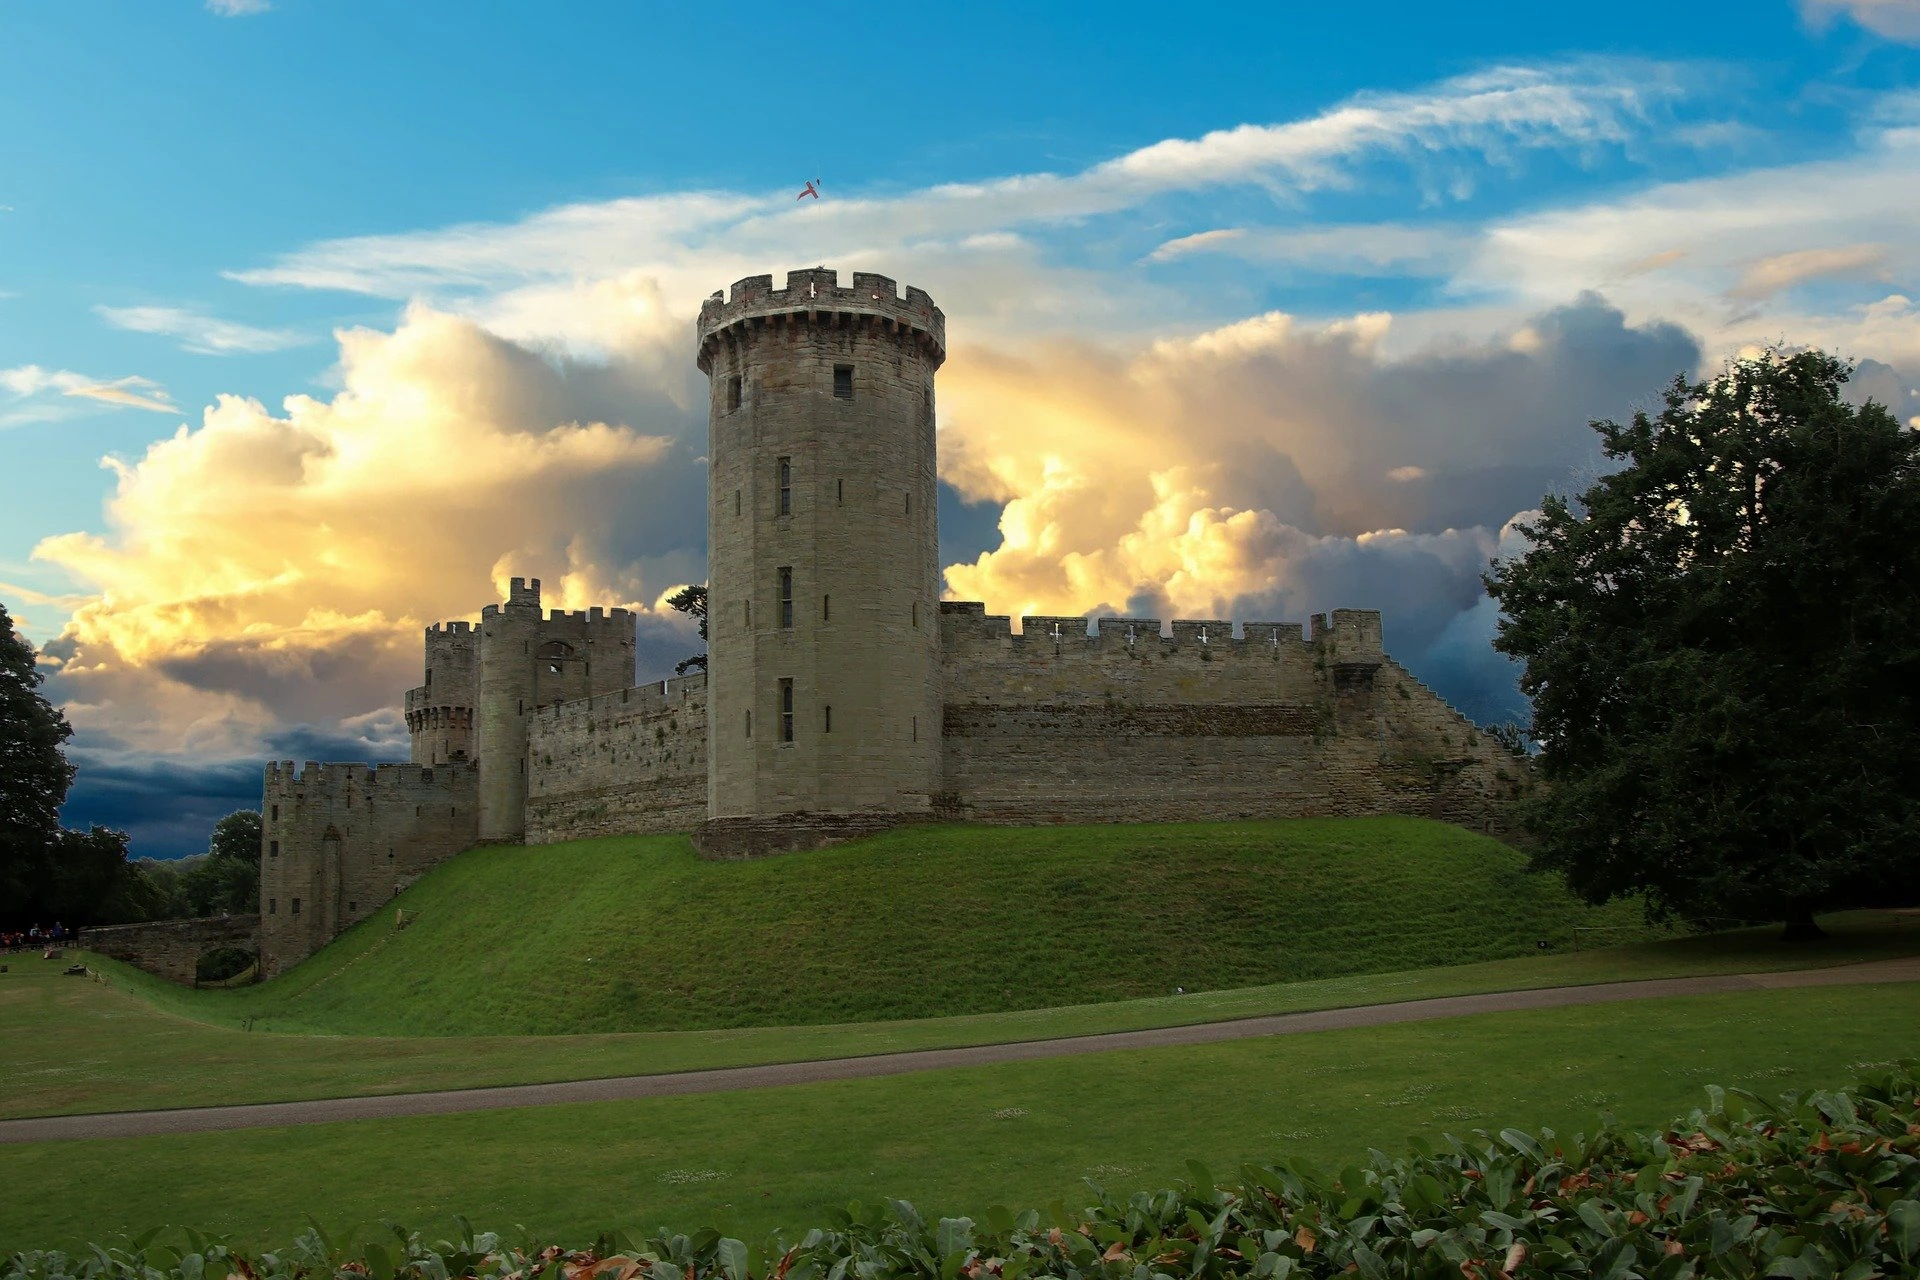 Protecting Warwick Castle’s 1100 years of history